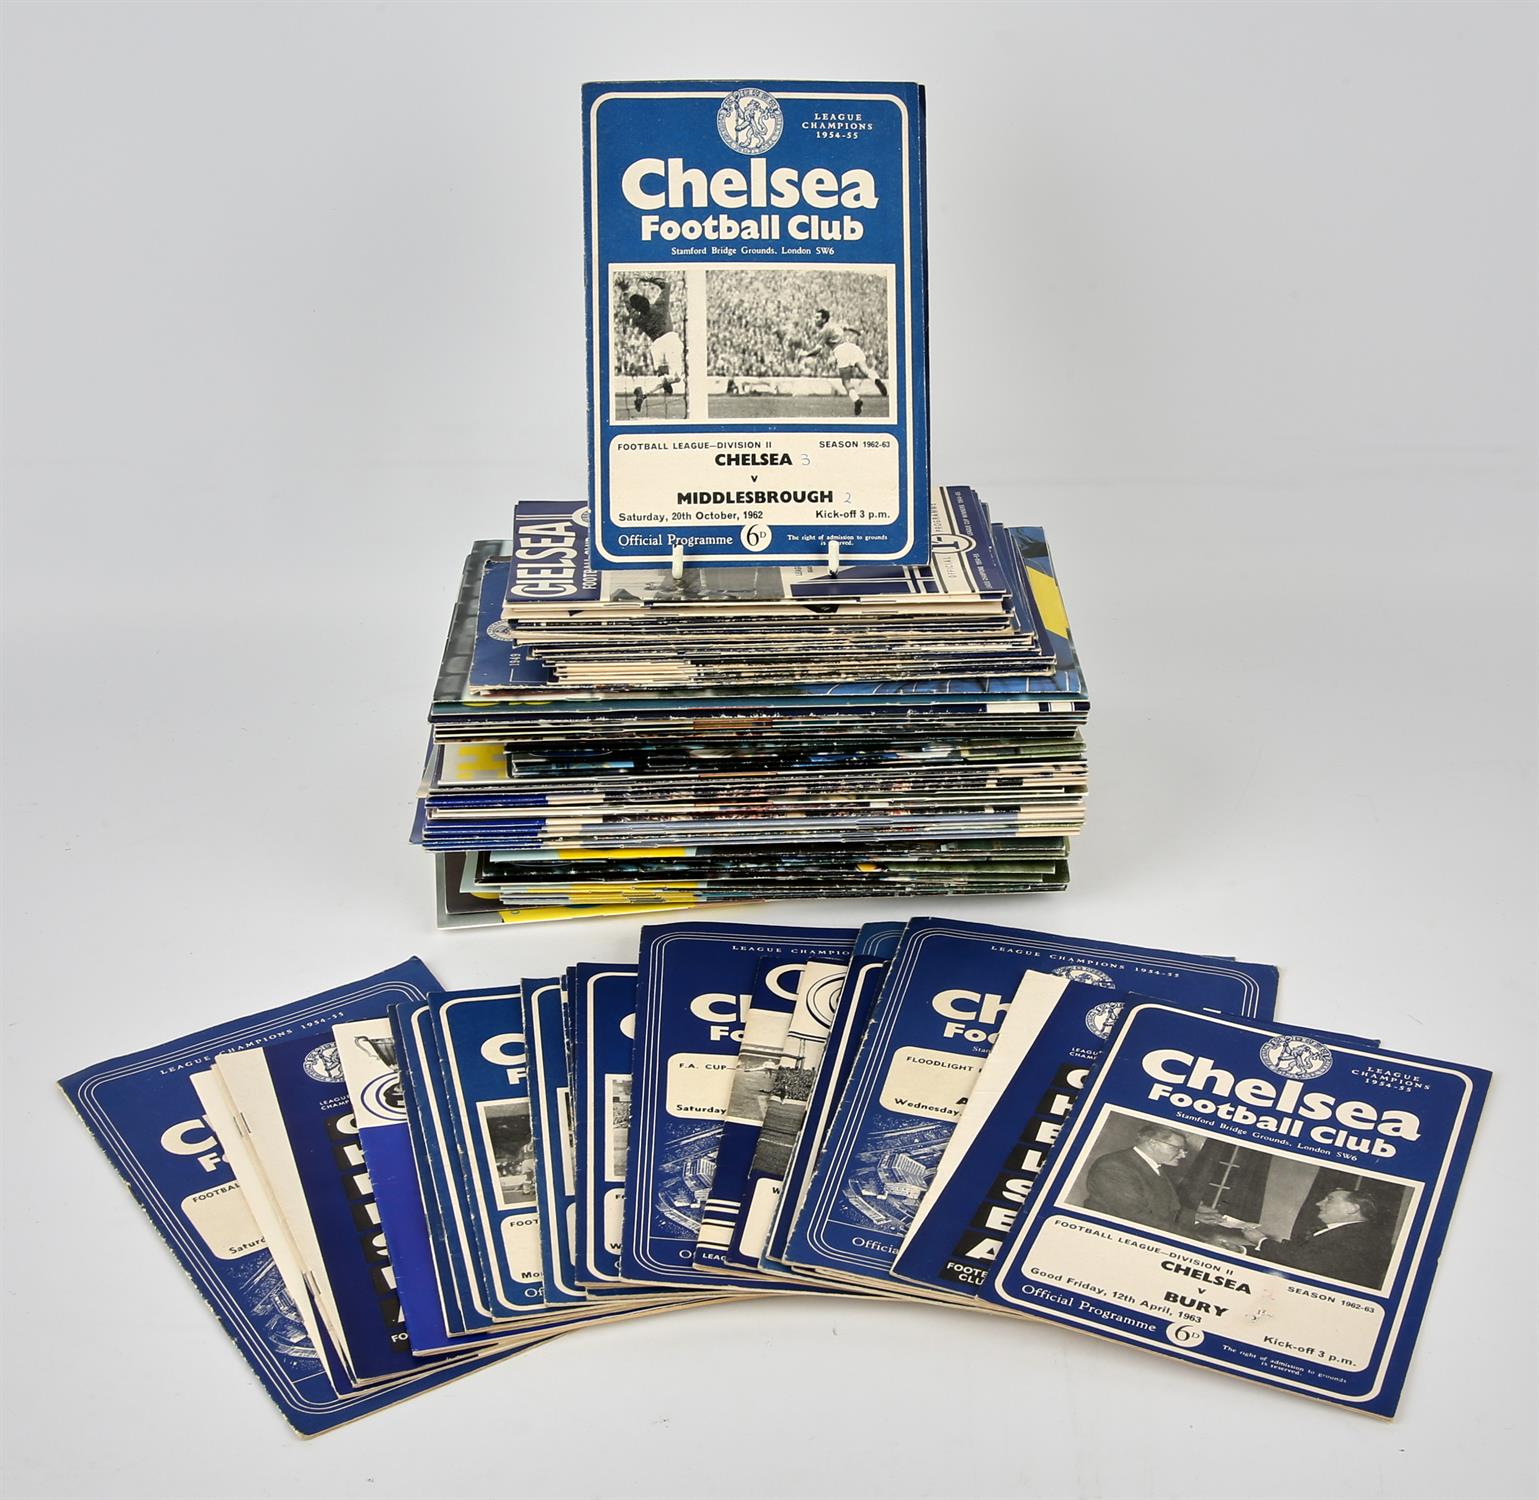 Large collection of 100 plus Chelsea FC football match day programmes, mainly from 1960s - 1980s.